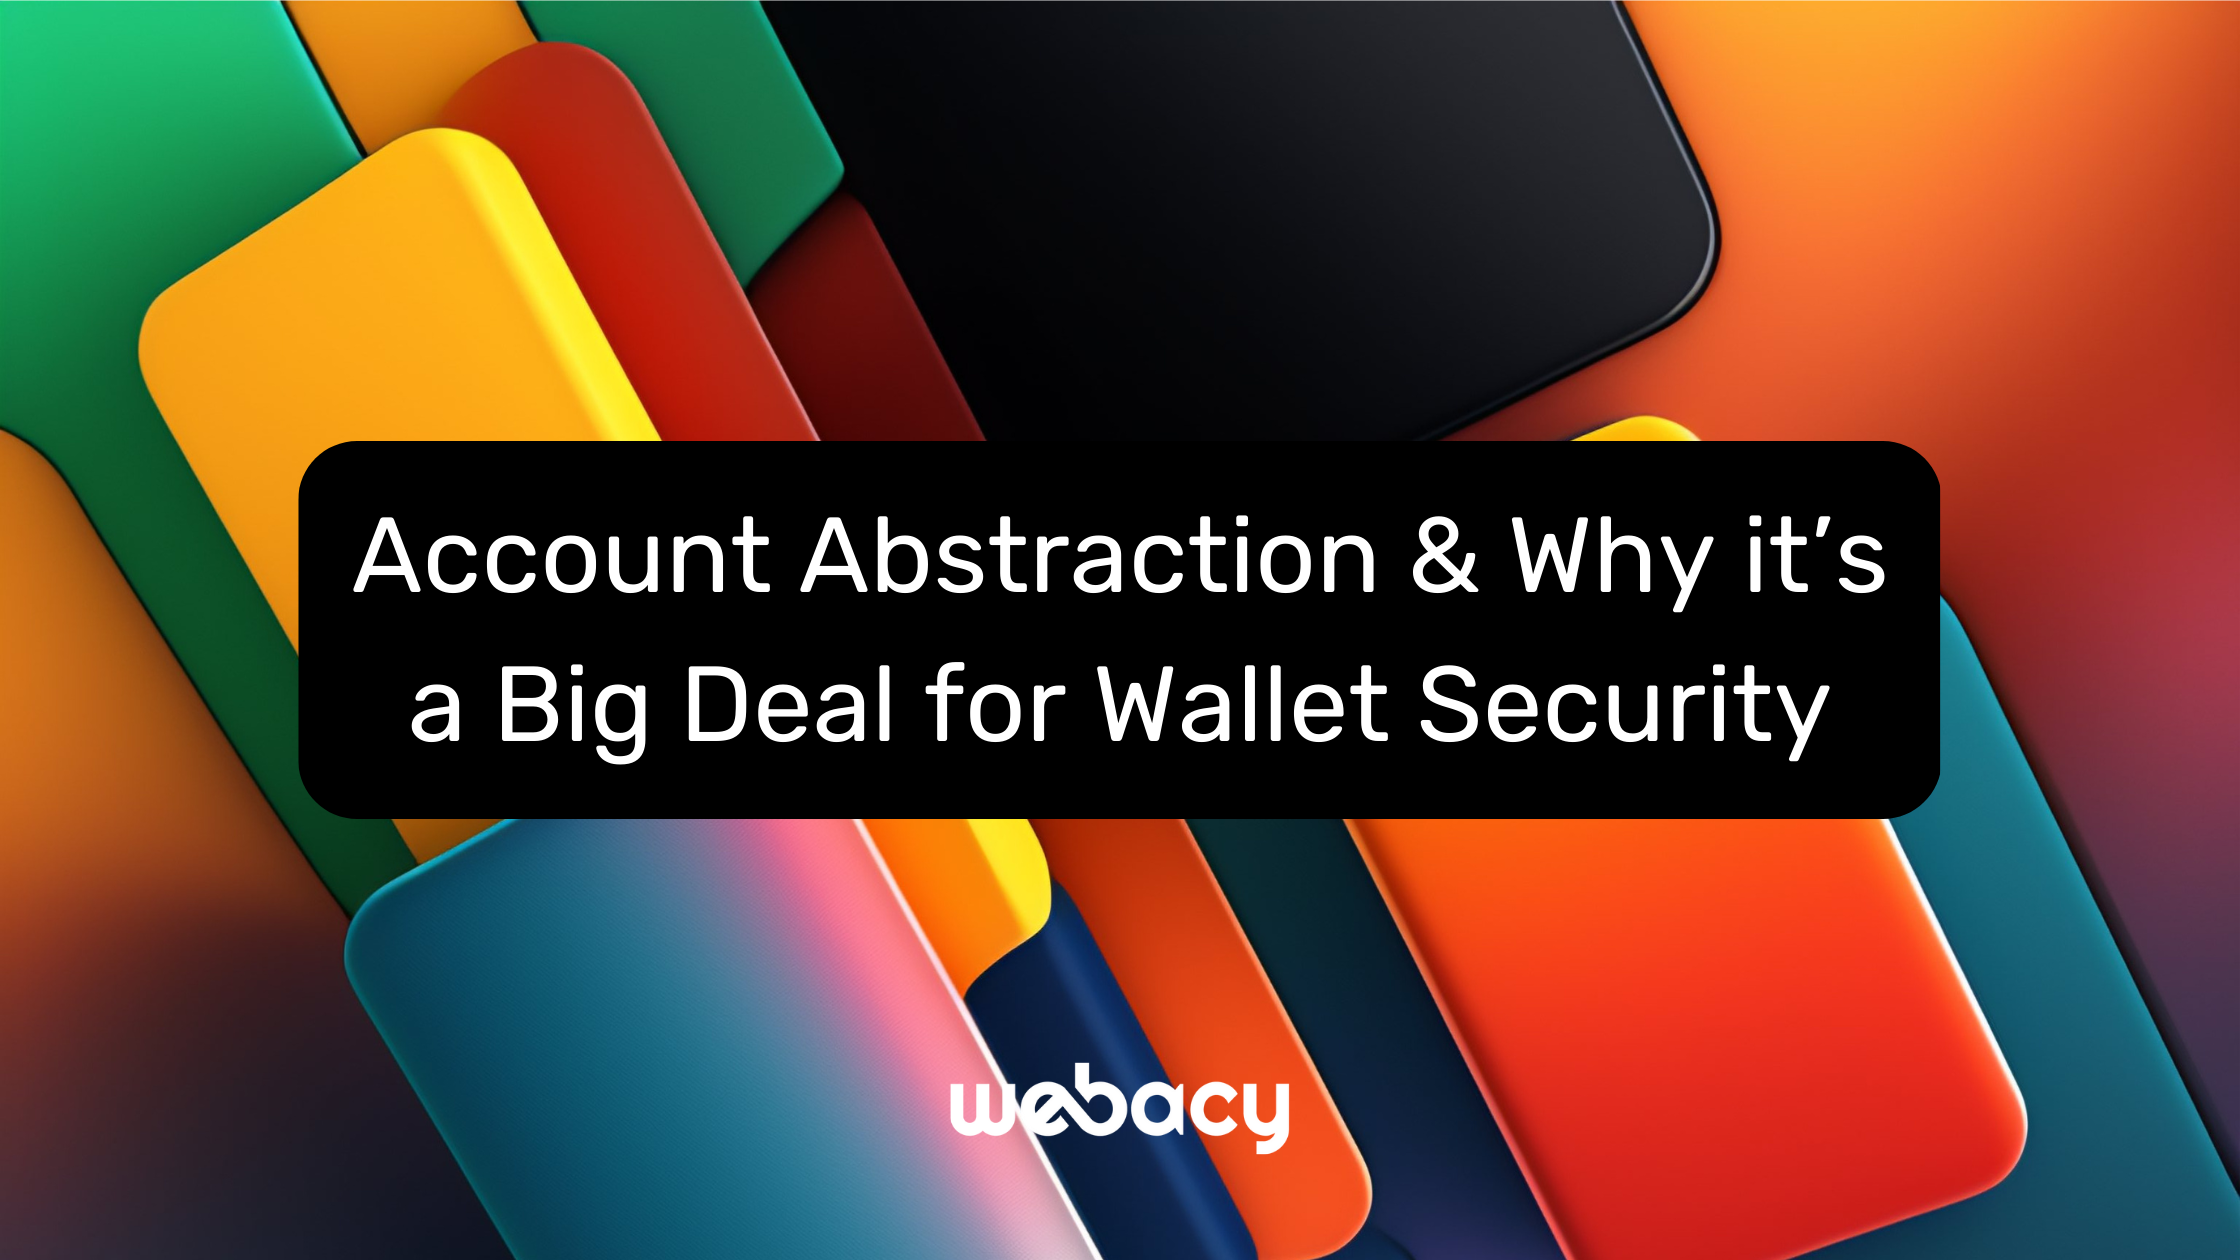 Account Abstraction & Why it’s a Big Deal for Wallet Security